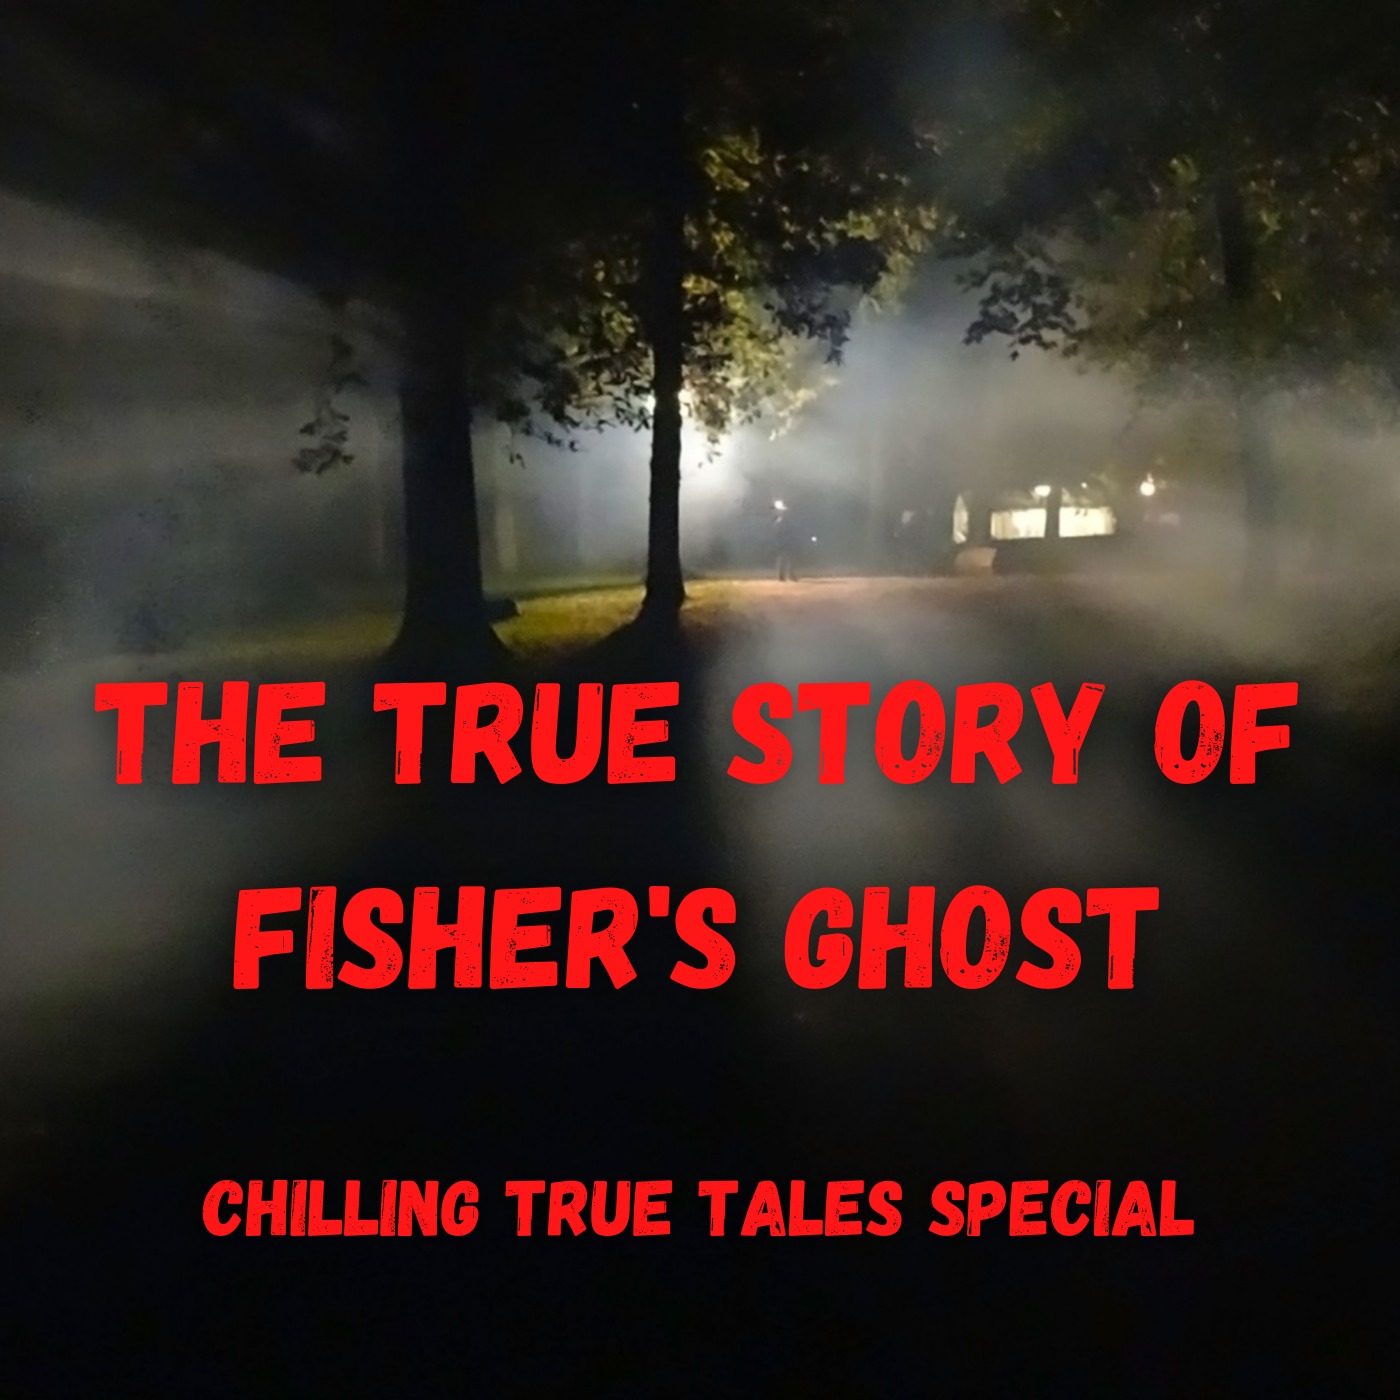 Chilling True Tales - Special Edition - The True Story of Fisher's Ghost